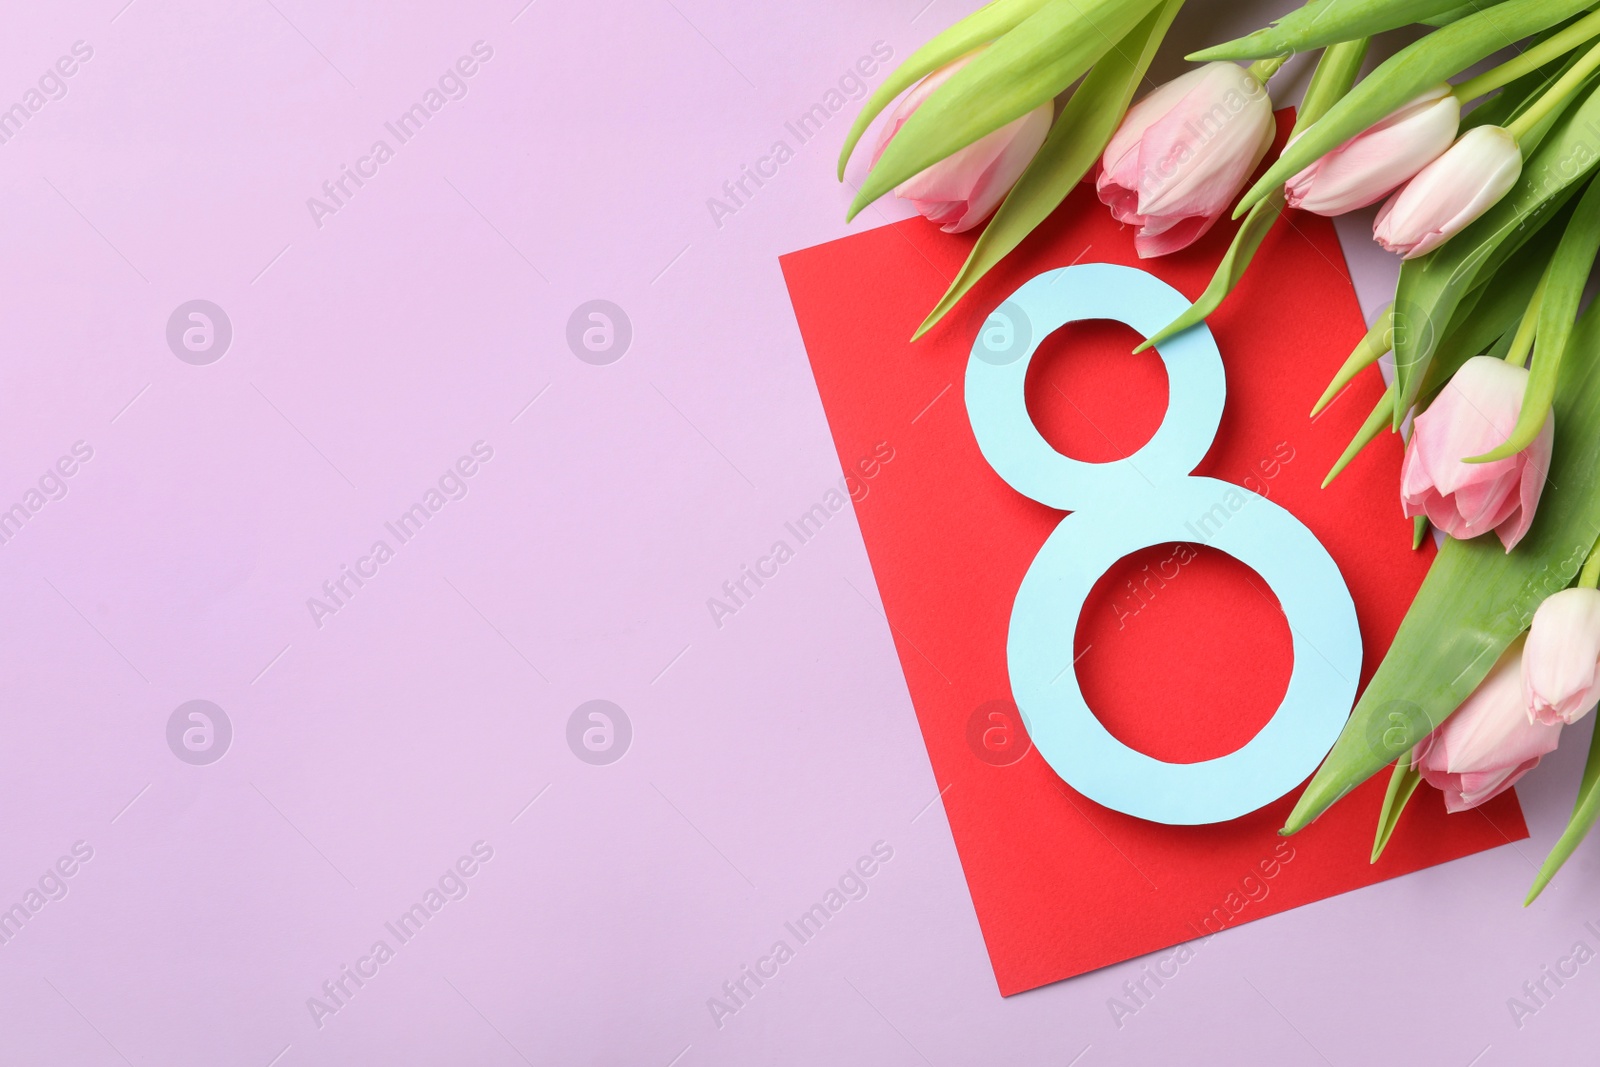 Photo of 8 March card design with tulips and space for text on violet background, flat lay. International Women's Day